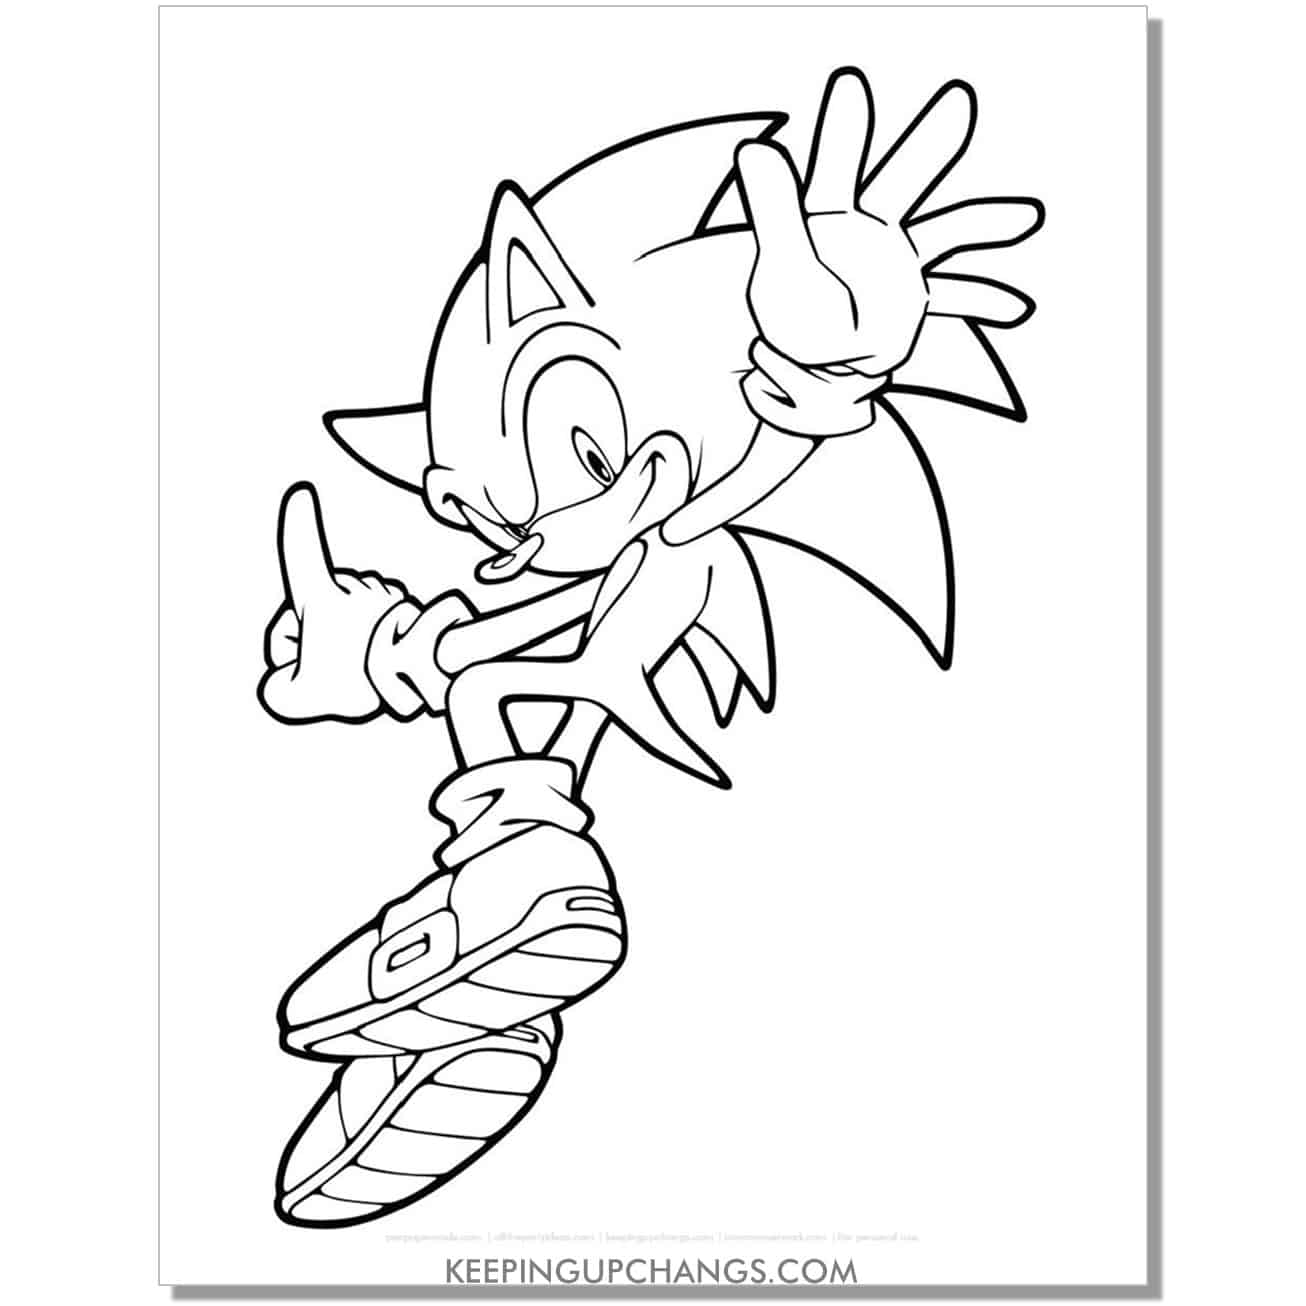 sonic looking back with palm out and other hand with index finger pointingcoloring page.